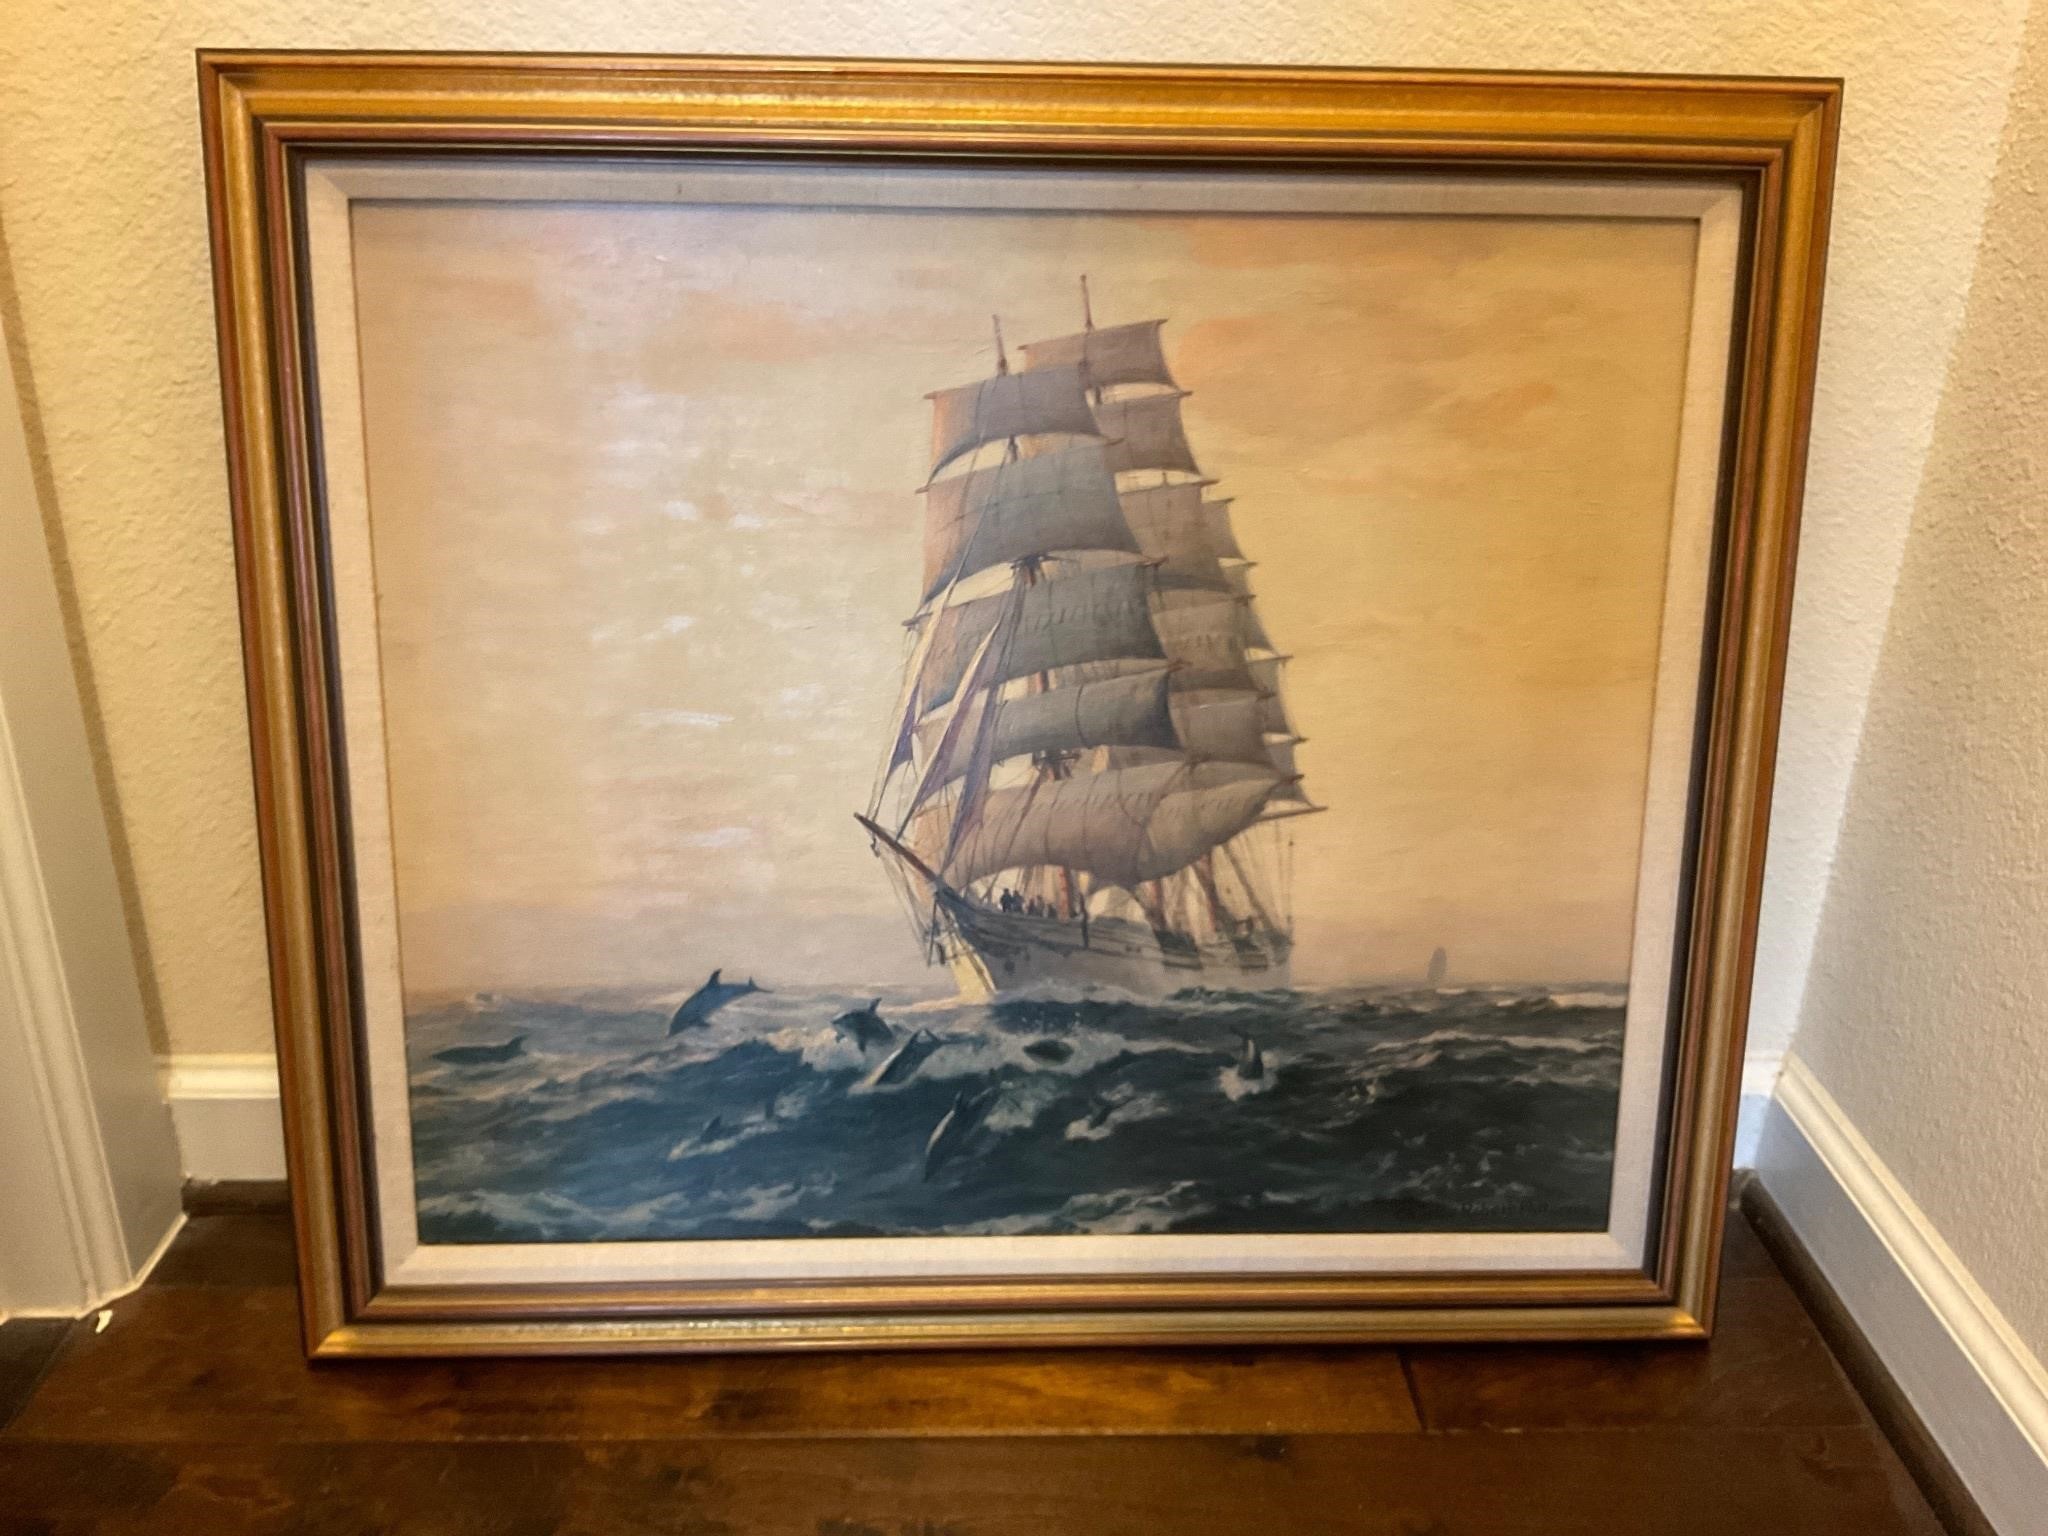 SHIP PAINTING ON CANVAS FRAMED